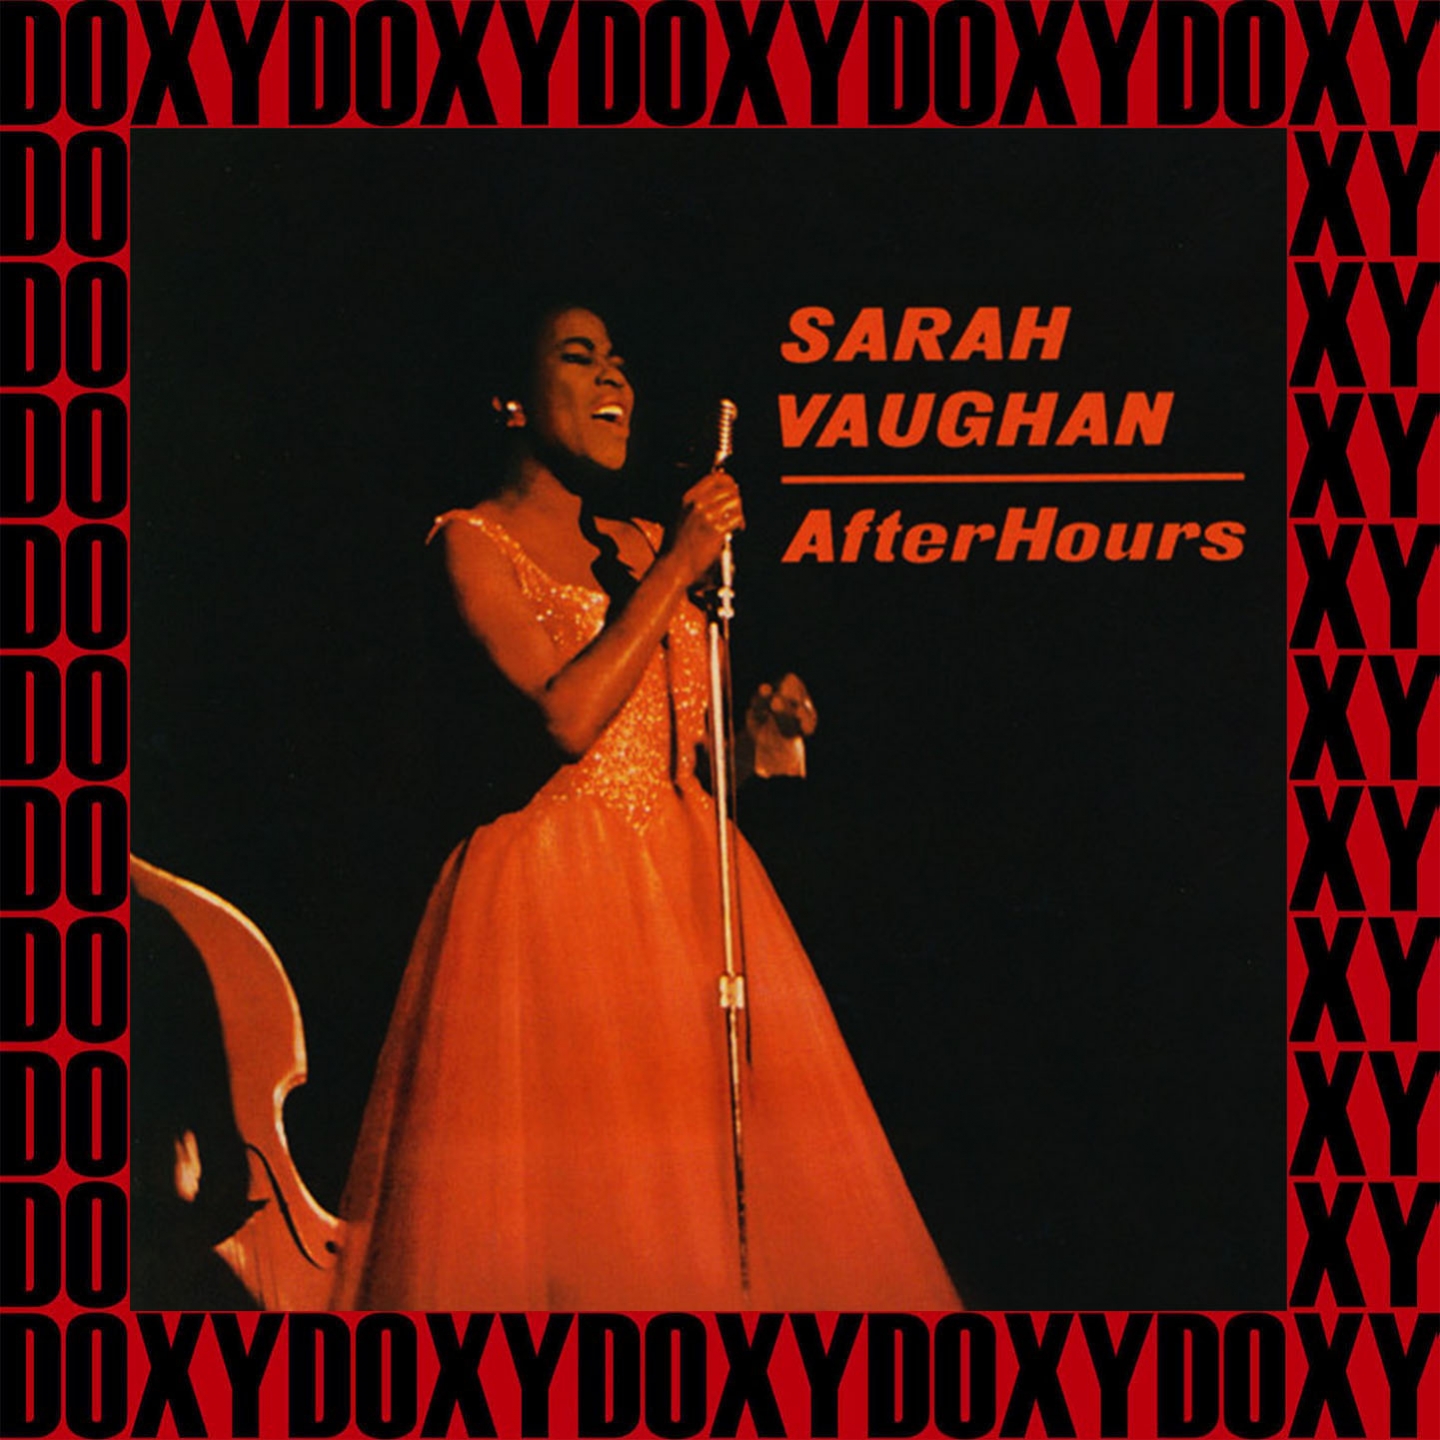 After Hours, 1961 (Expanded, Remastered Version) (Doxy Collection)